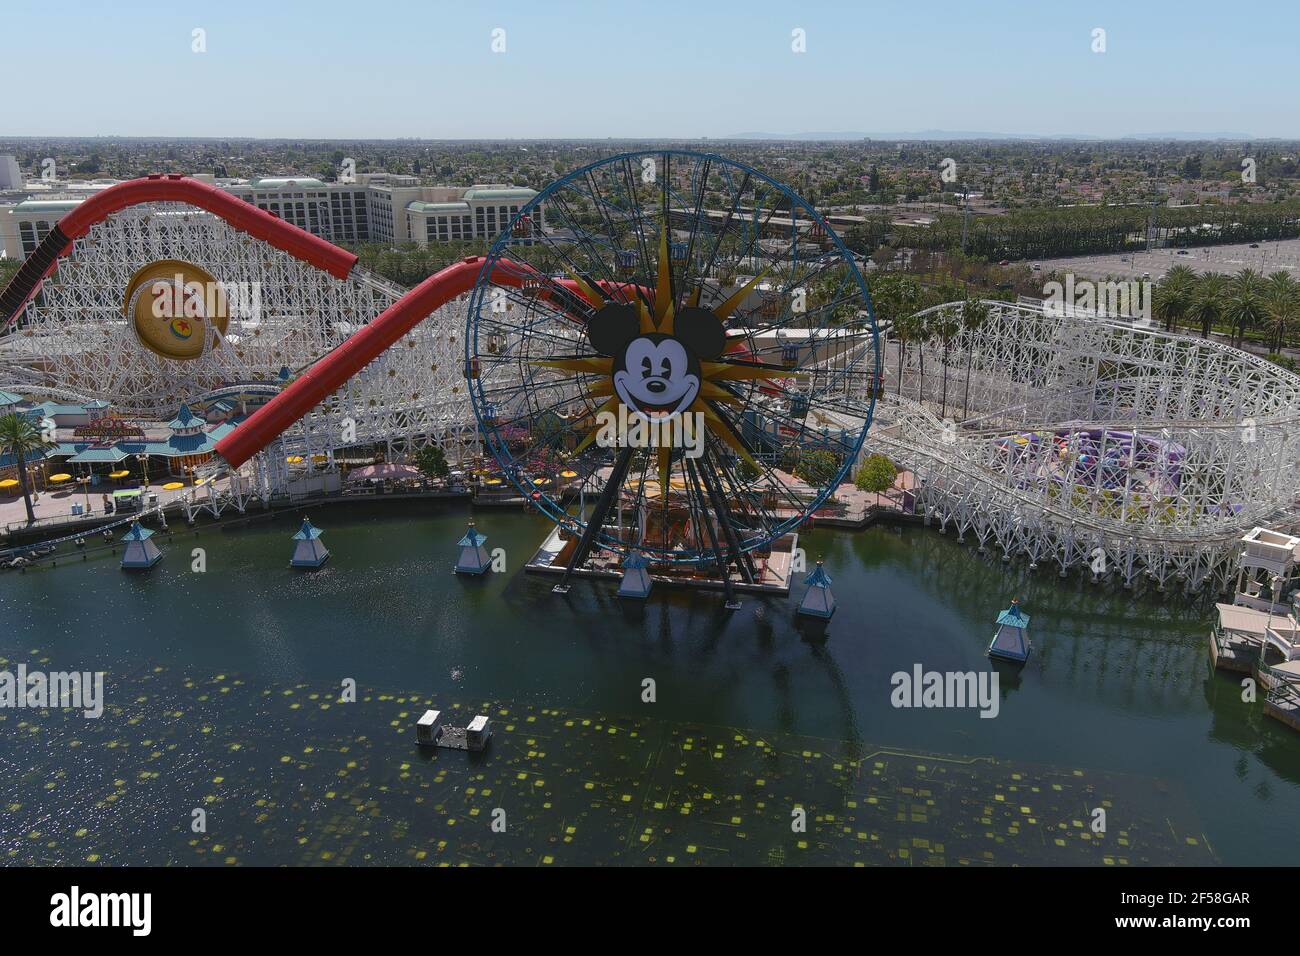 An aerial view of Mickey's Fun Wheel and the Indricoaster roller coaster ride at Disney California Adventure Park, Wednesday, March 24, 2021, in Anahe Stock Photo